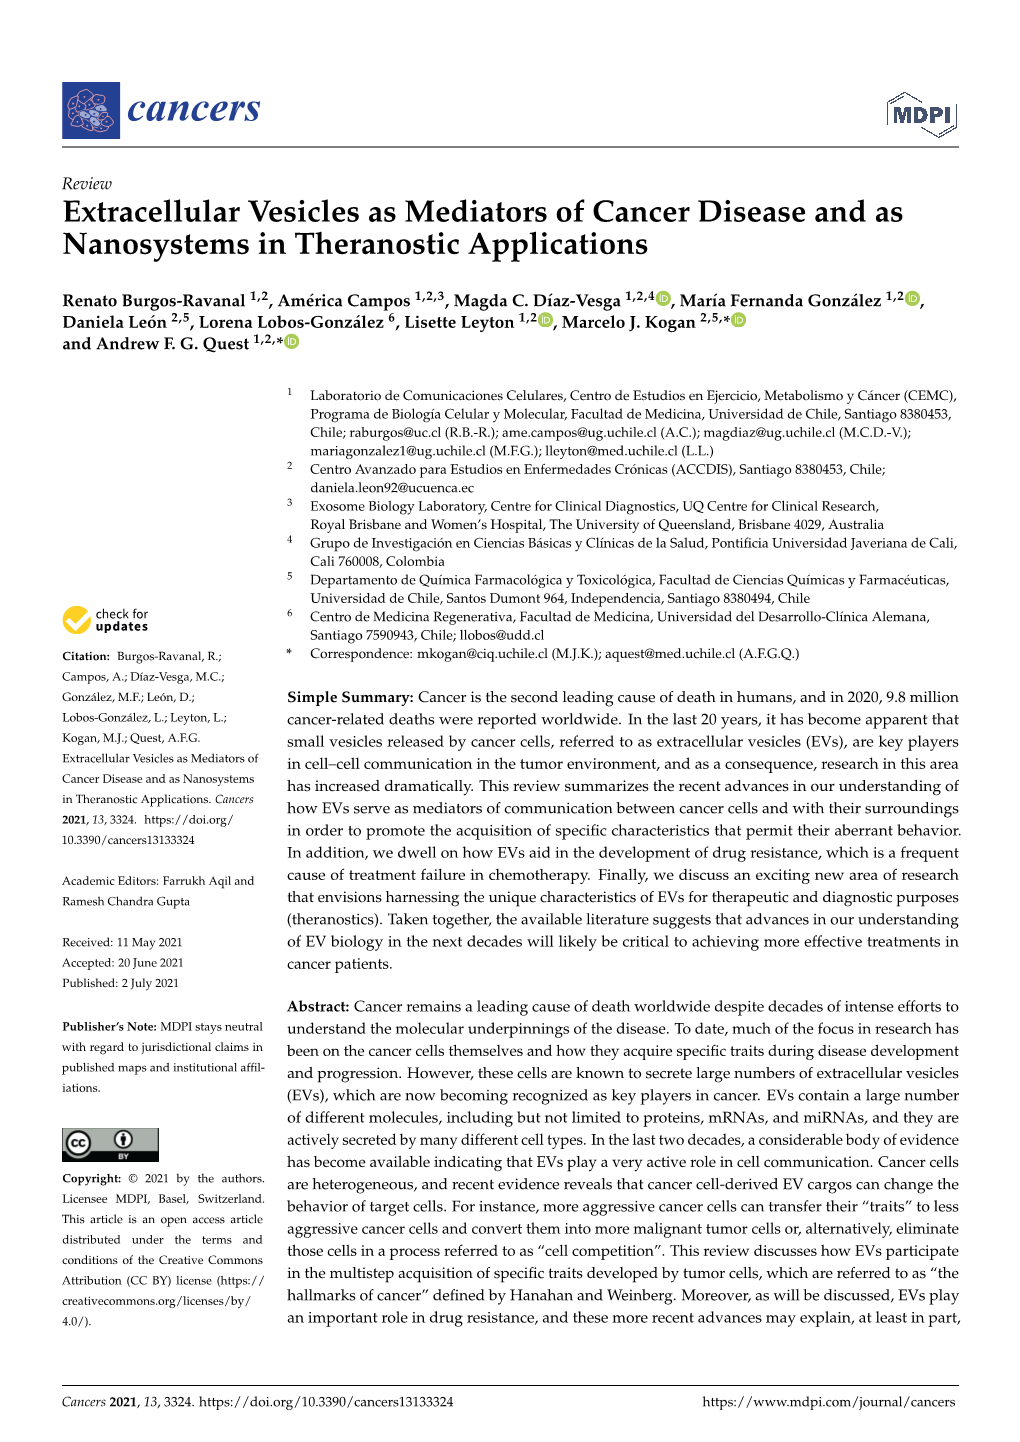 Extracellular Vesicles As Mediators of Cancer Disease and As Nanosystems in Theranostic Applications